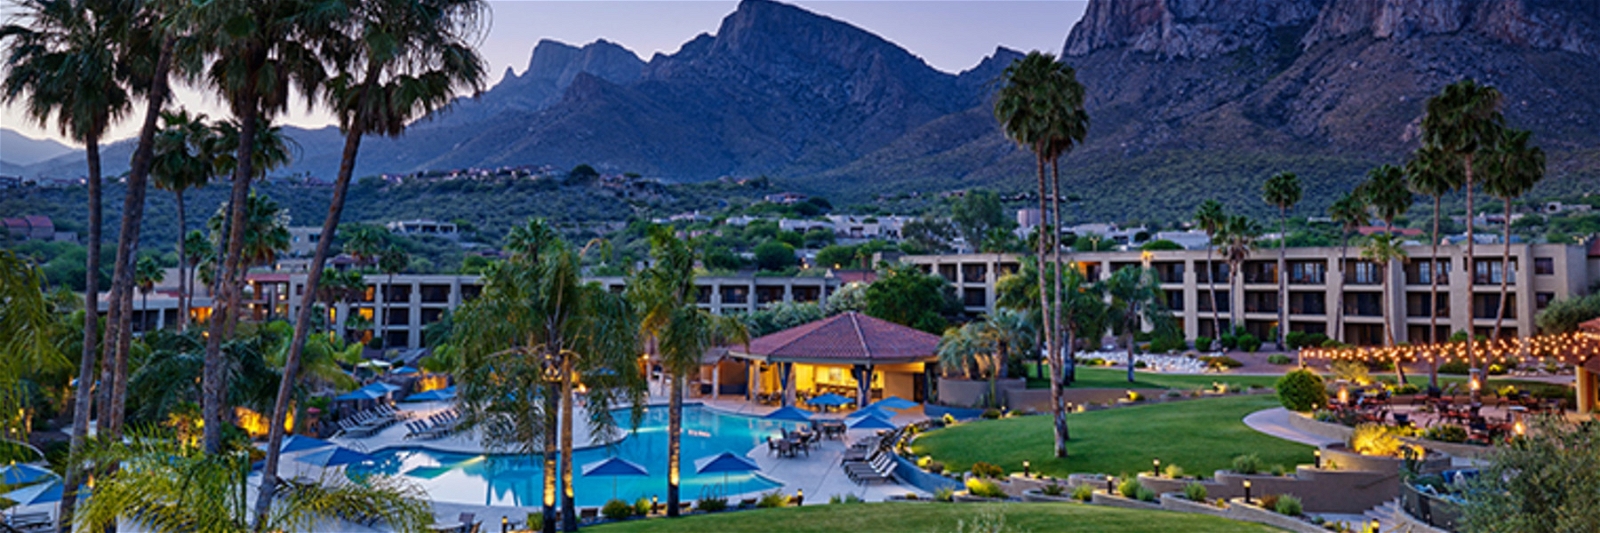 Golf Vacation Package - Hilton Tucson El Conquistador Resort Stay & Play + Ventana Canyon and Starr Pass from $233!